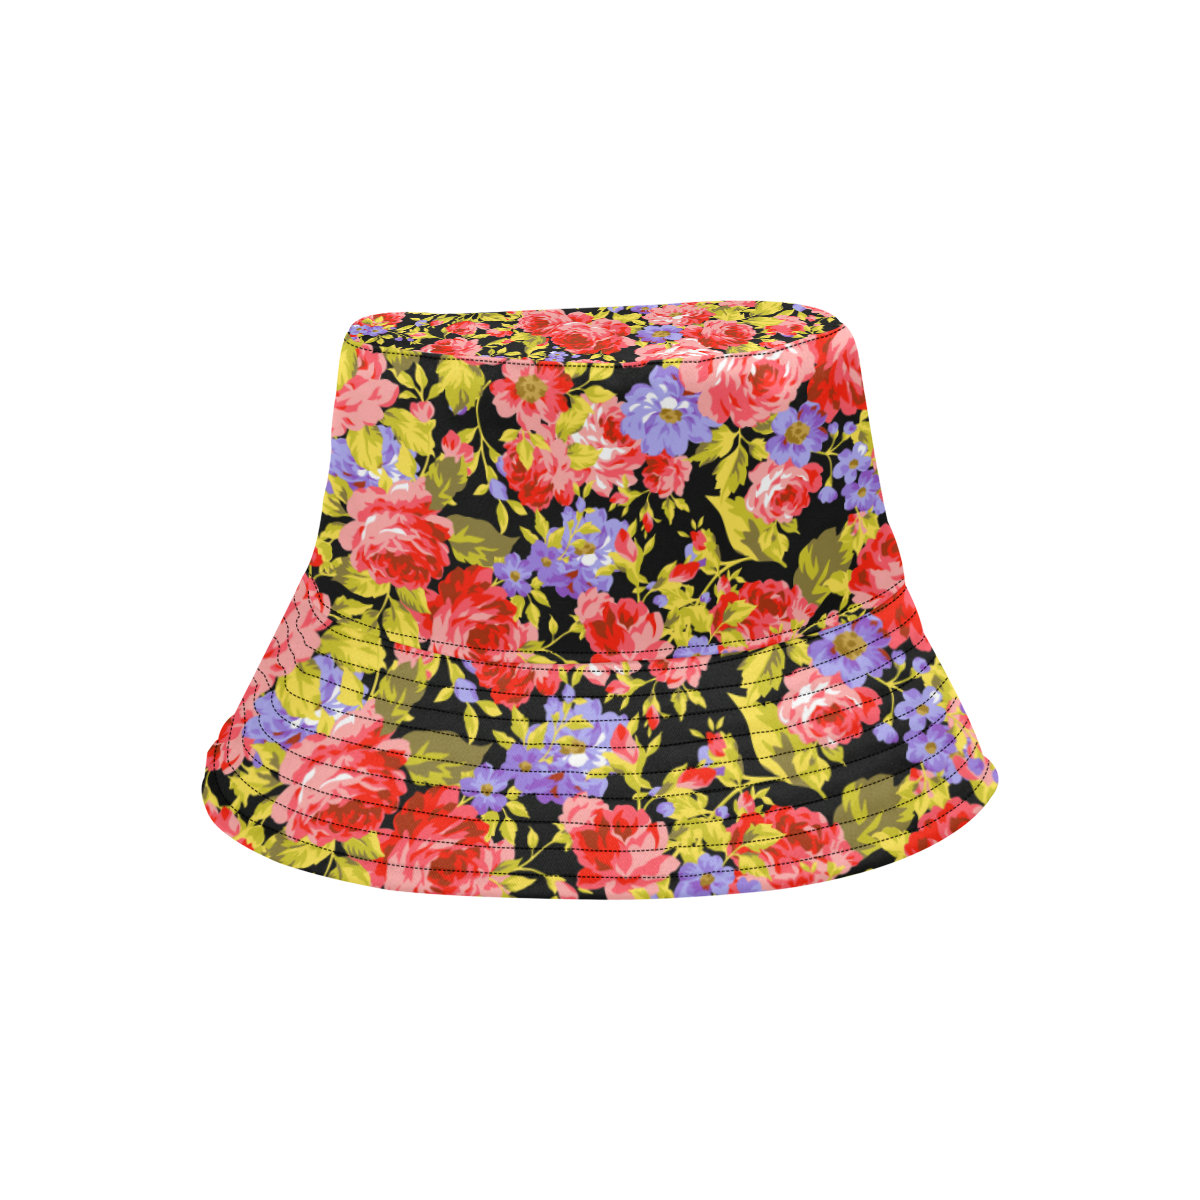 Colorful Flower Pattern All Over Print Bucket Hat